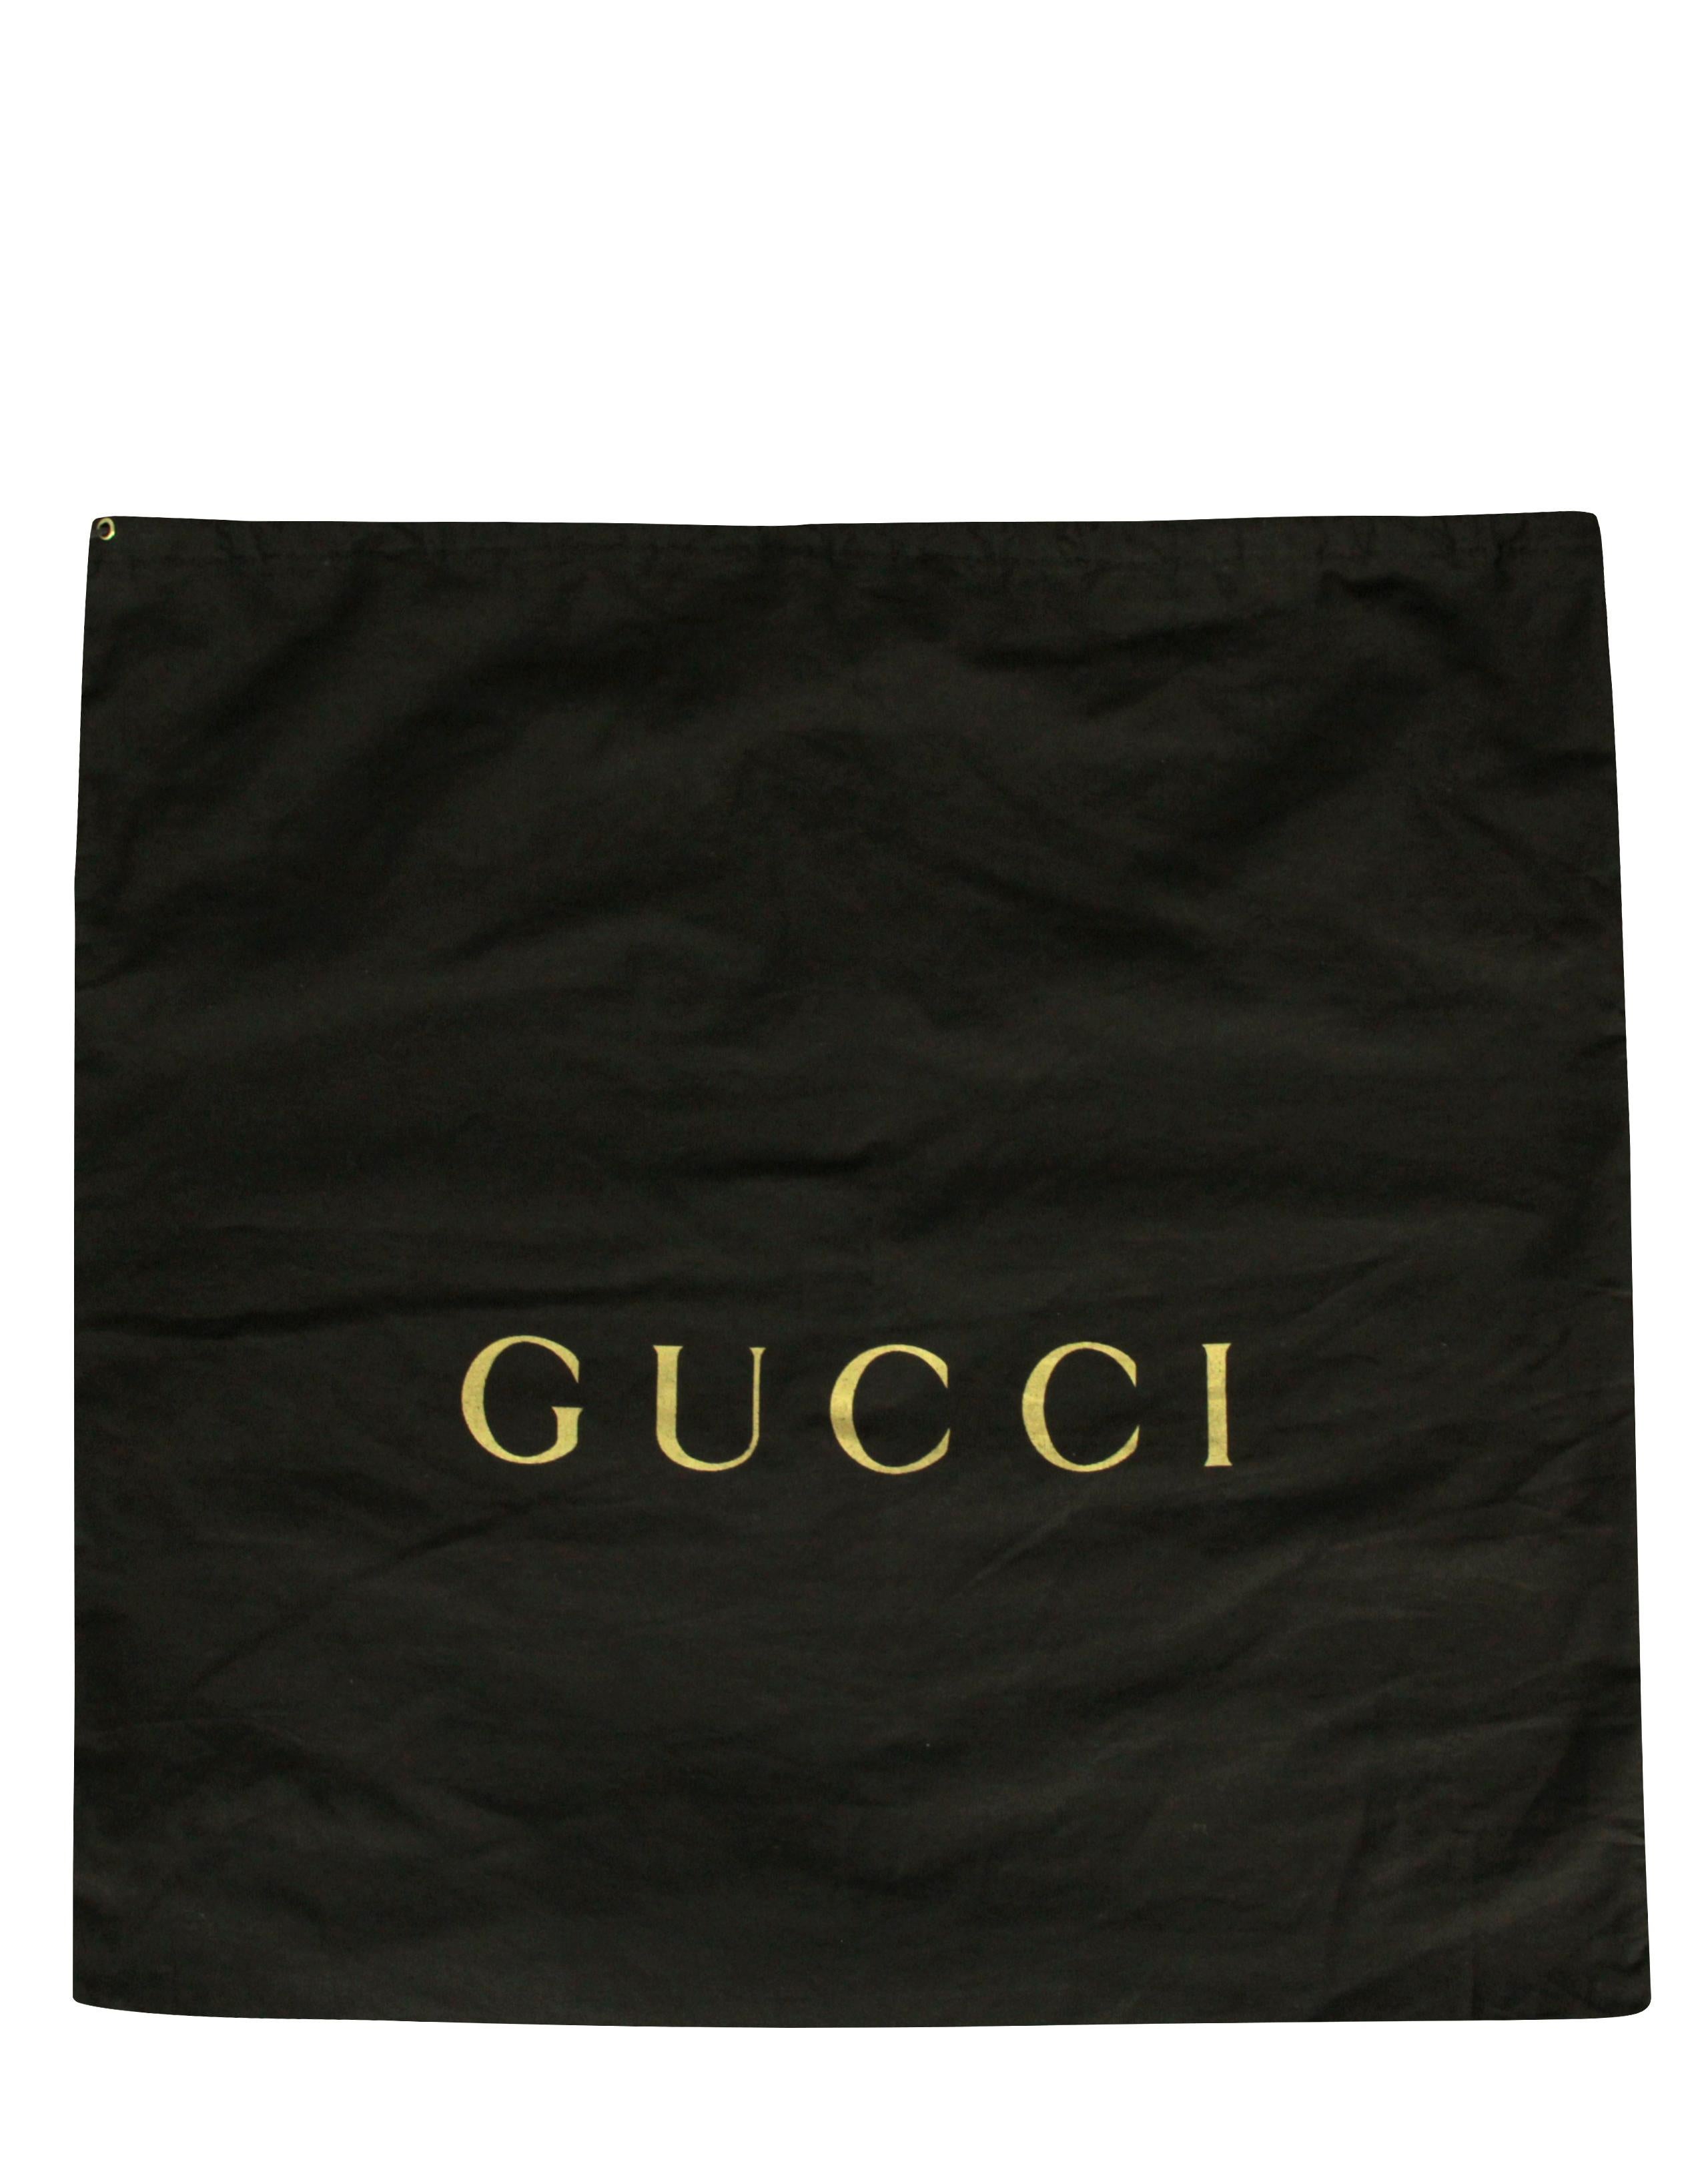 Gucci Red Pebbled Calfskin Leather GG Soho Chain Tote Bag 2